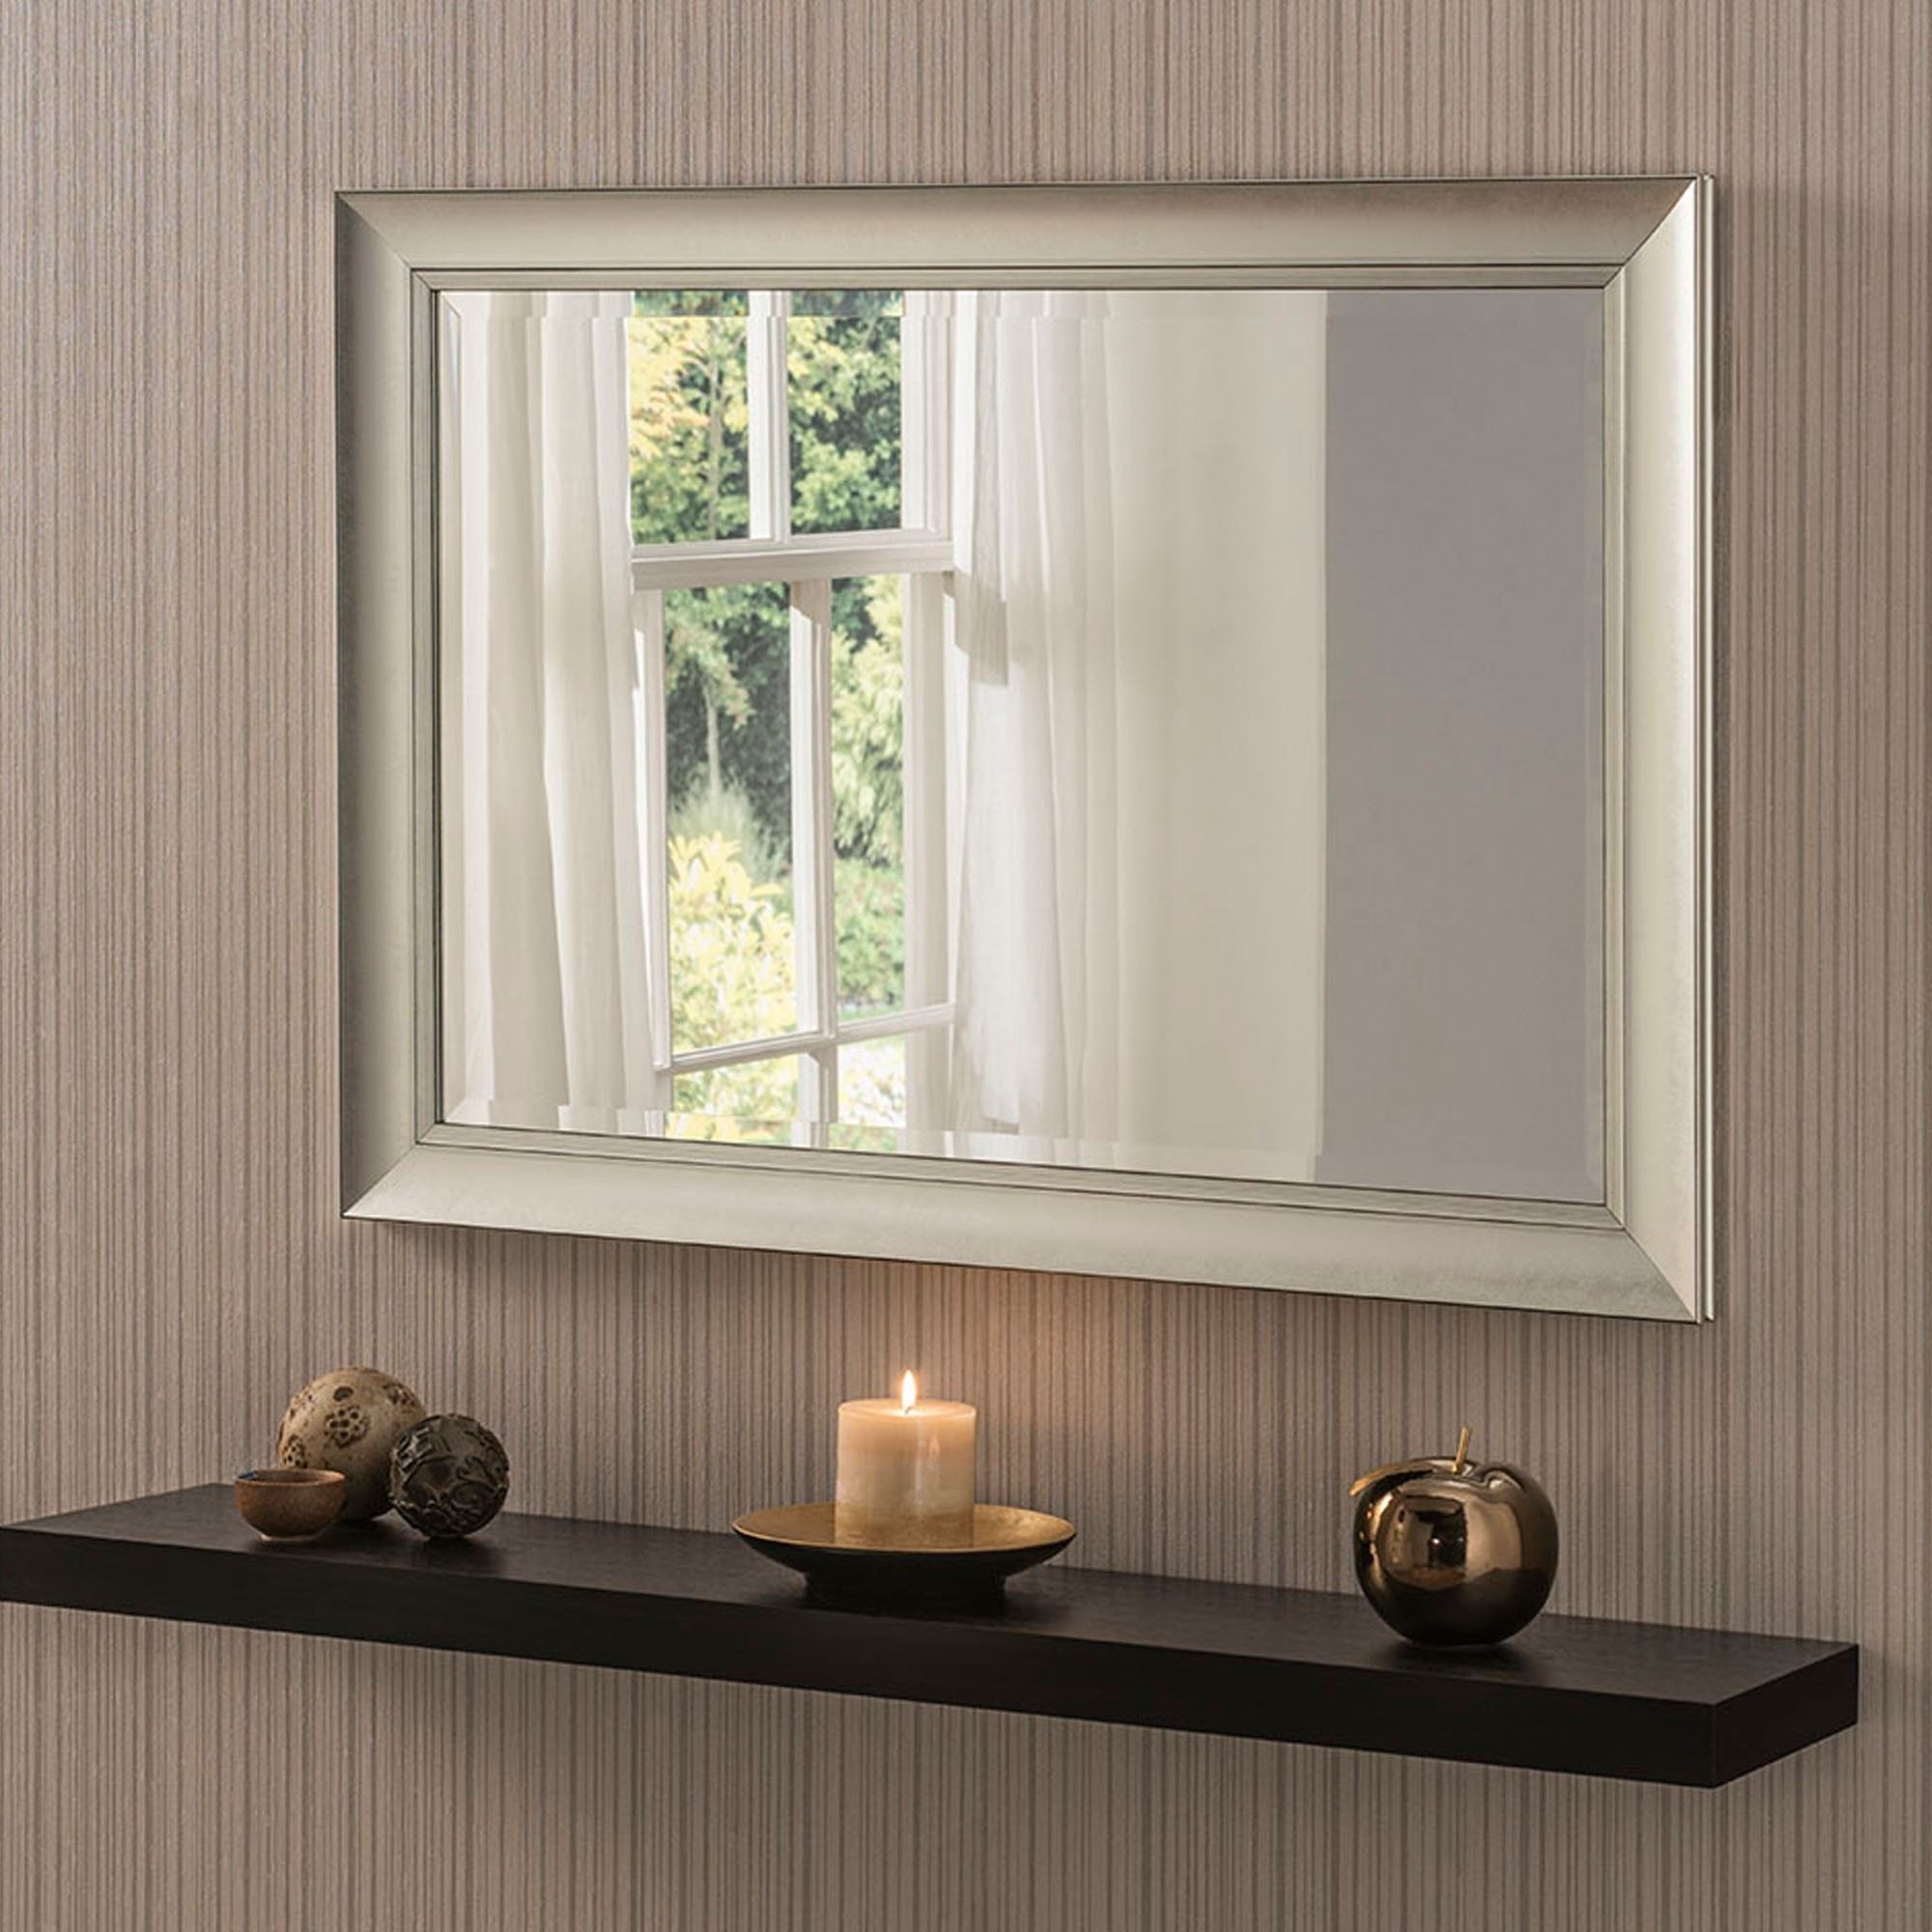 Contemporary Silver Beveled Wall Mirror With Regard To Most Recently Released Modern & Contemporary Beveled Wall Mirrors (View 12 of 20)